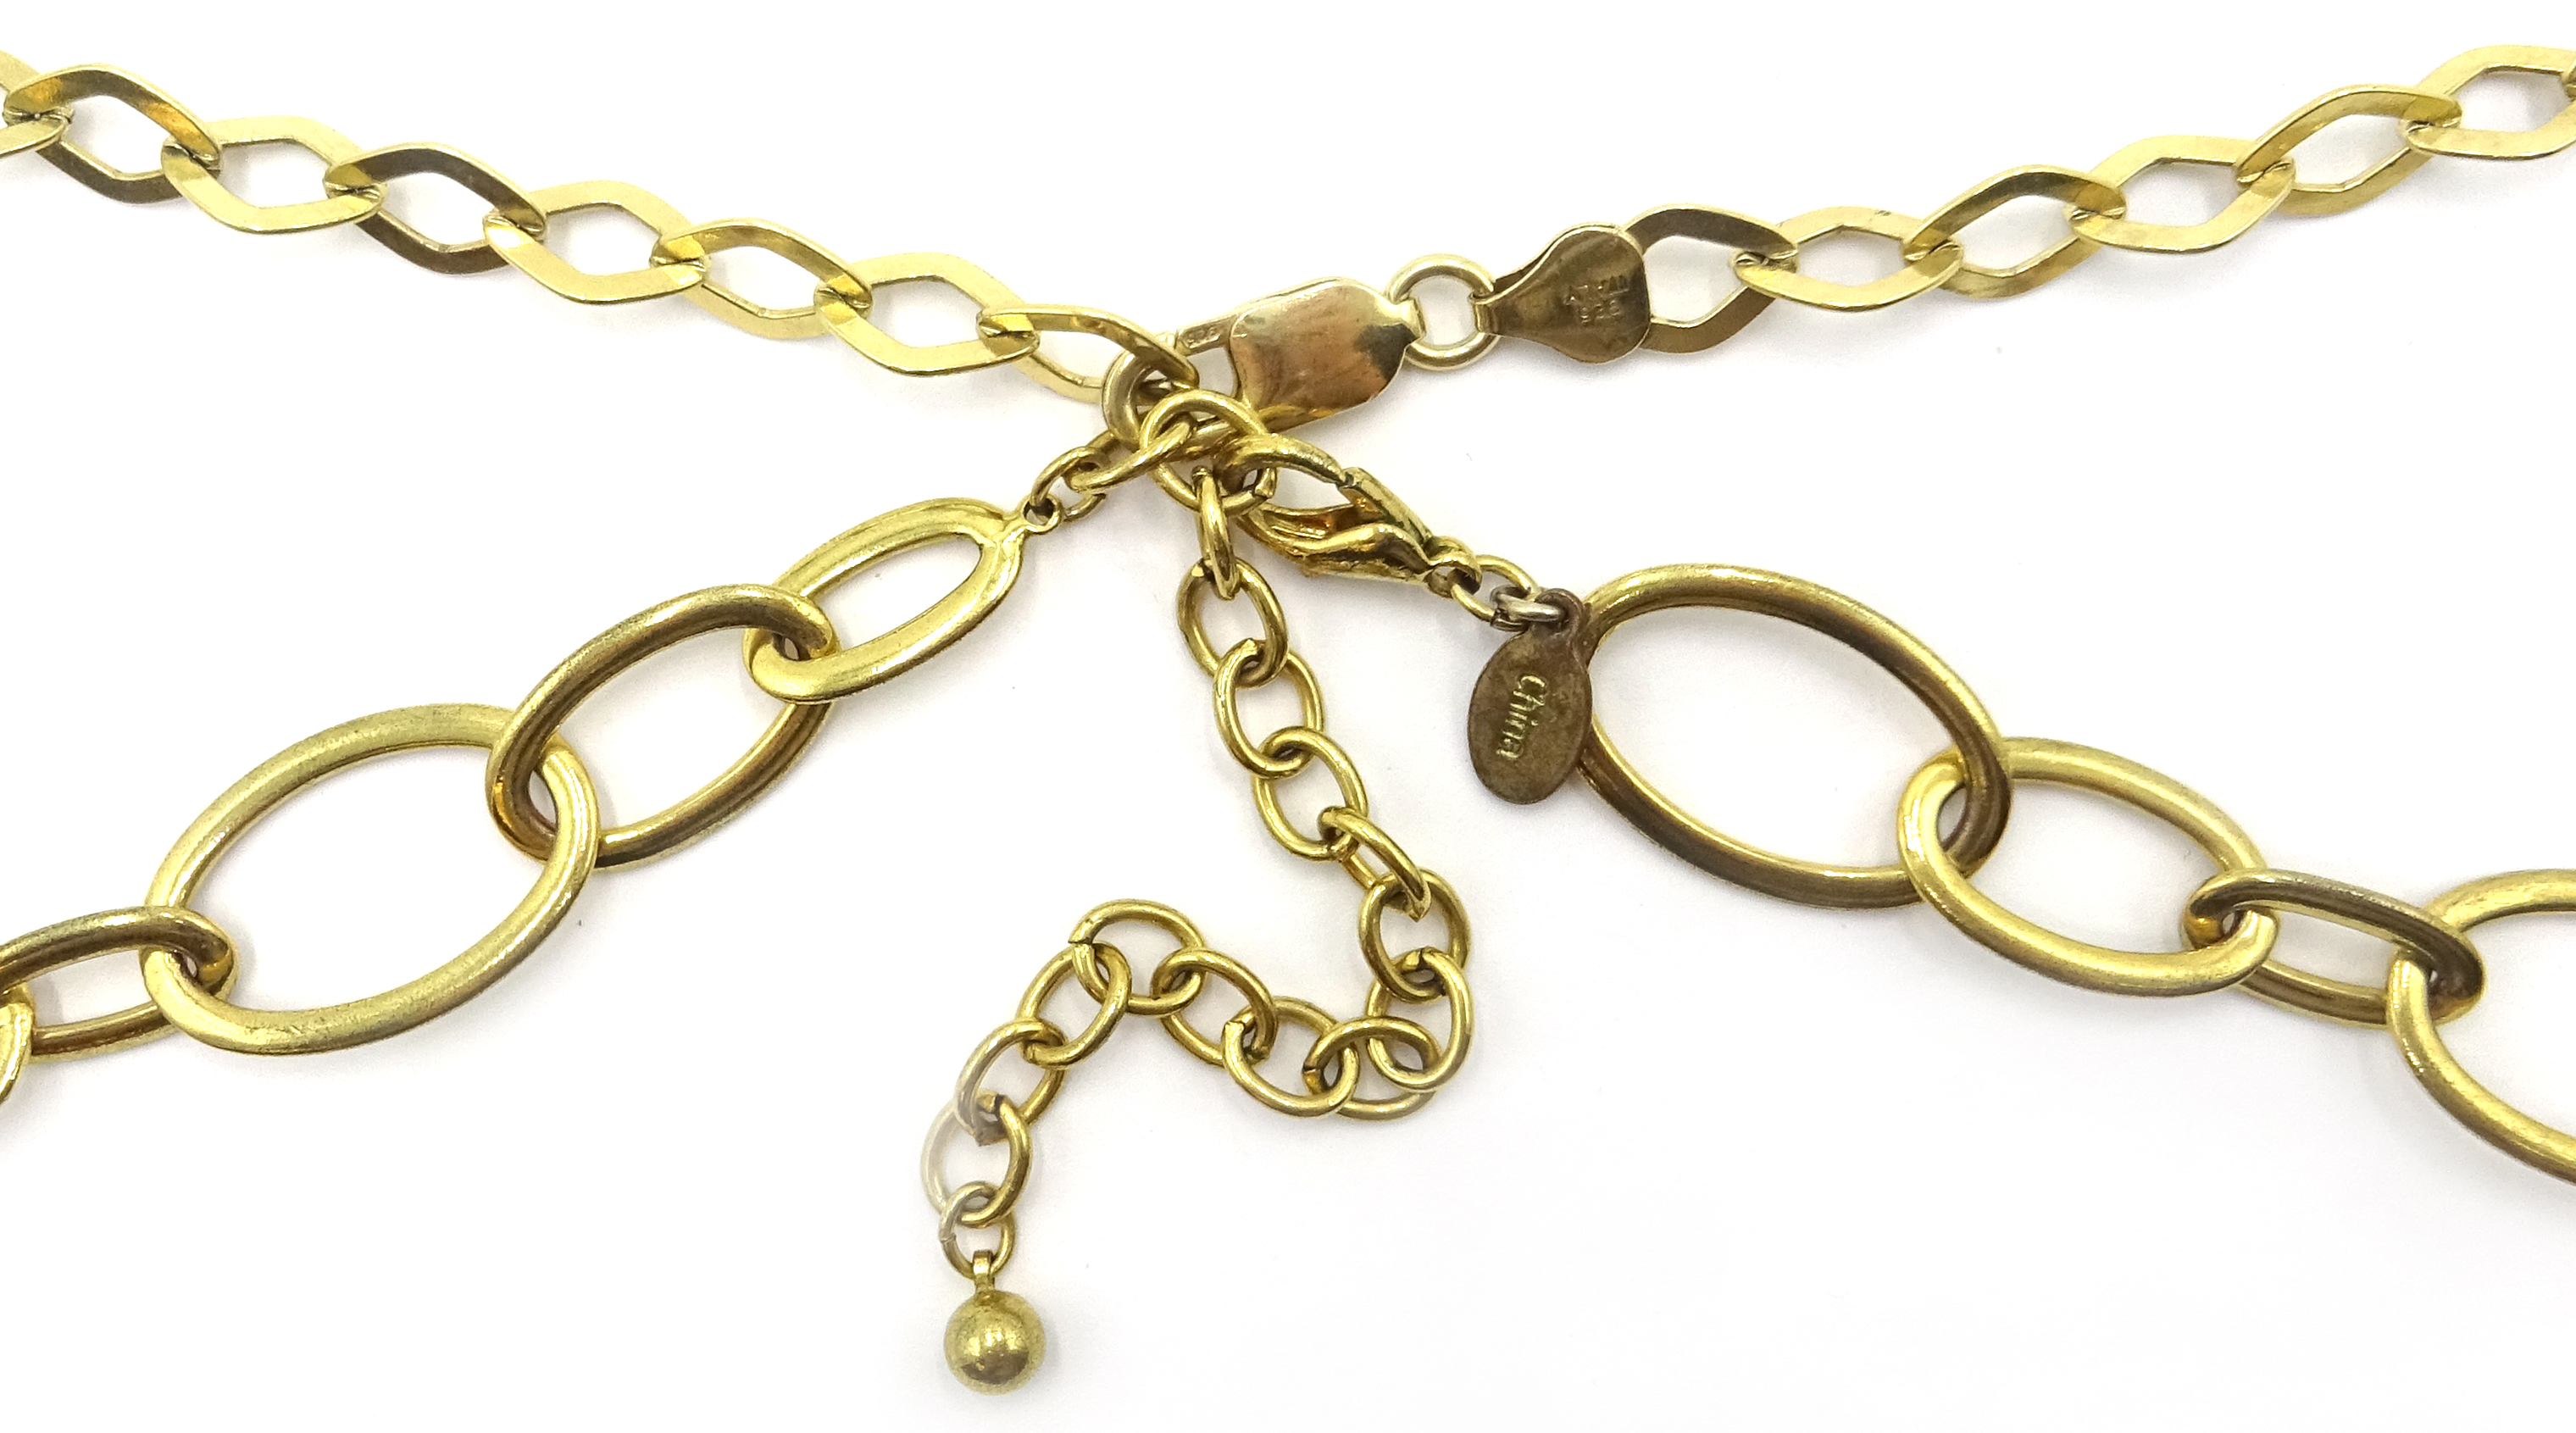 Stone set pendant on 9ct gold necklace chain, hallmarked and silver-gilt double chain necklace, - Image 3 of 5